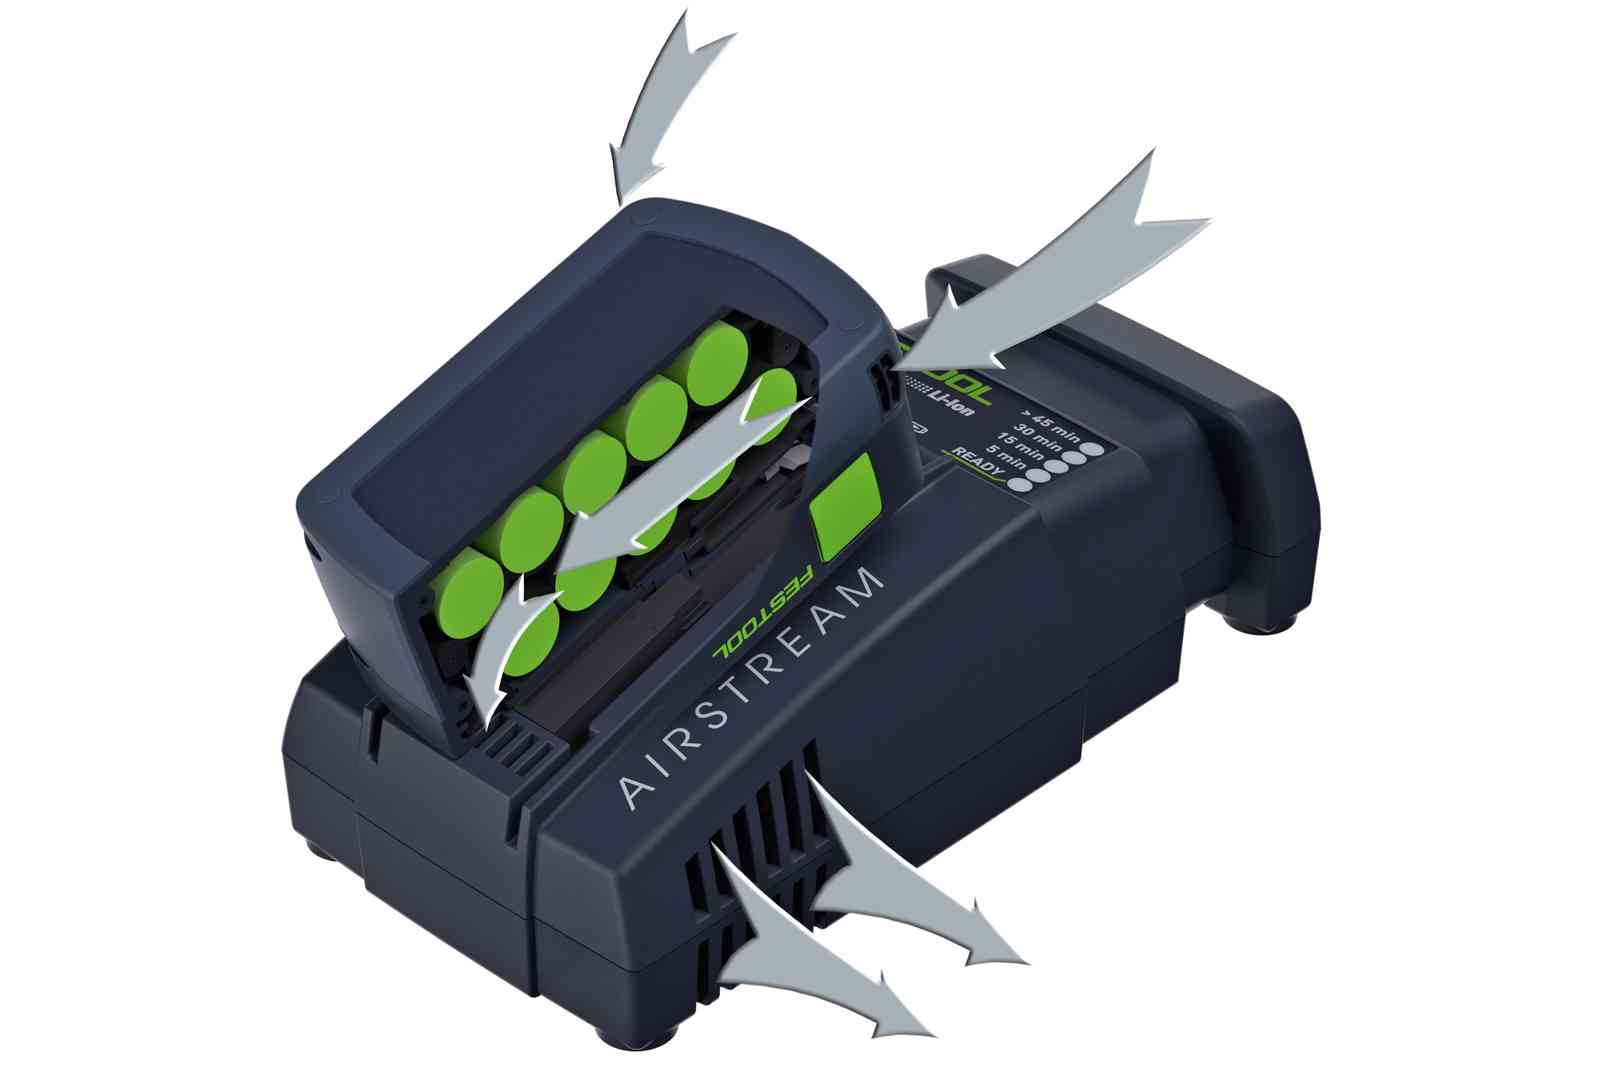 Festool Rapid charger SCA 8 200178 Power Tool Services